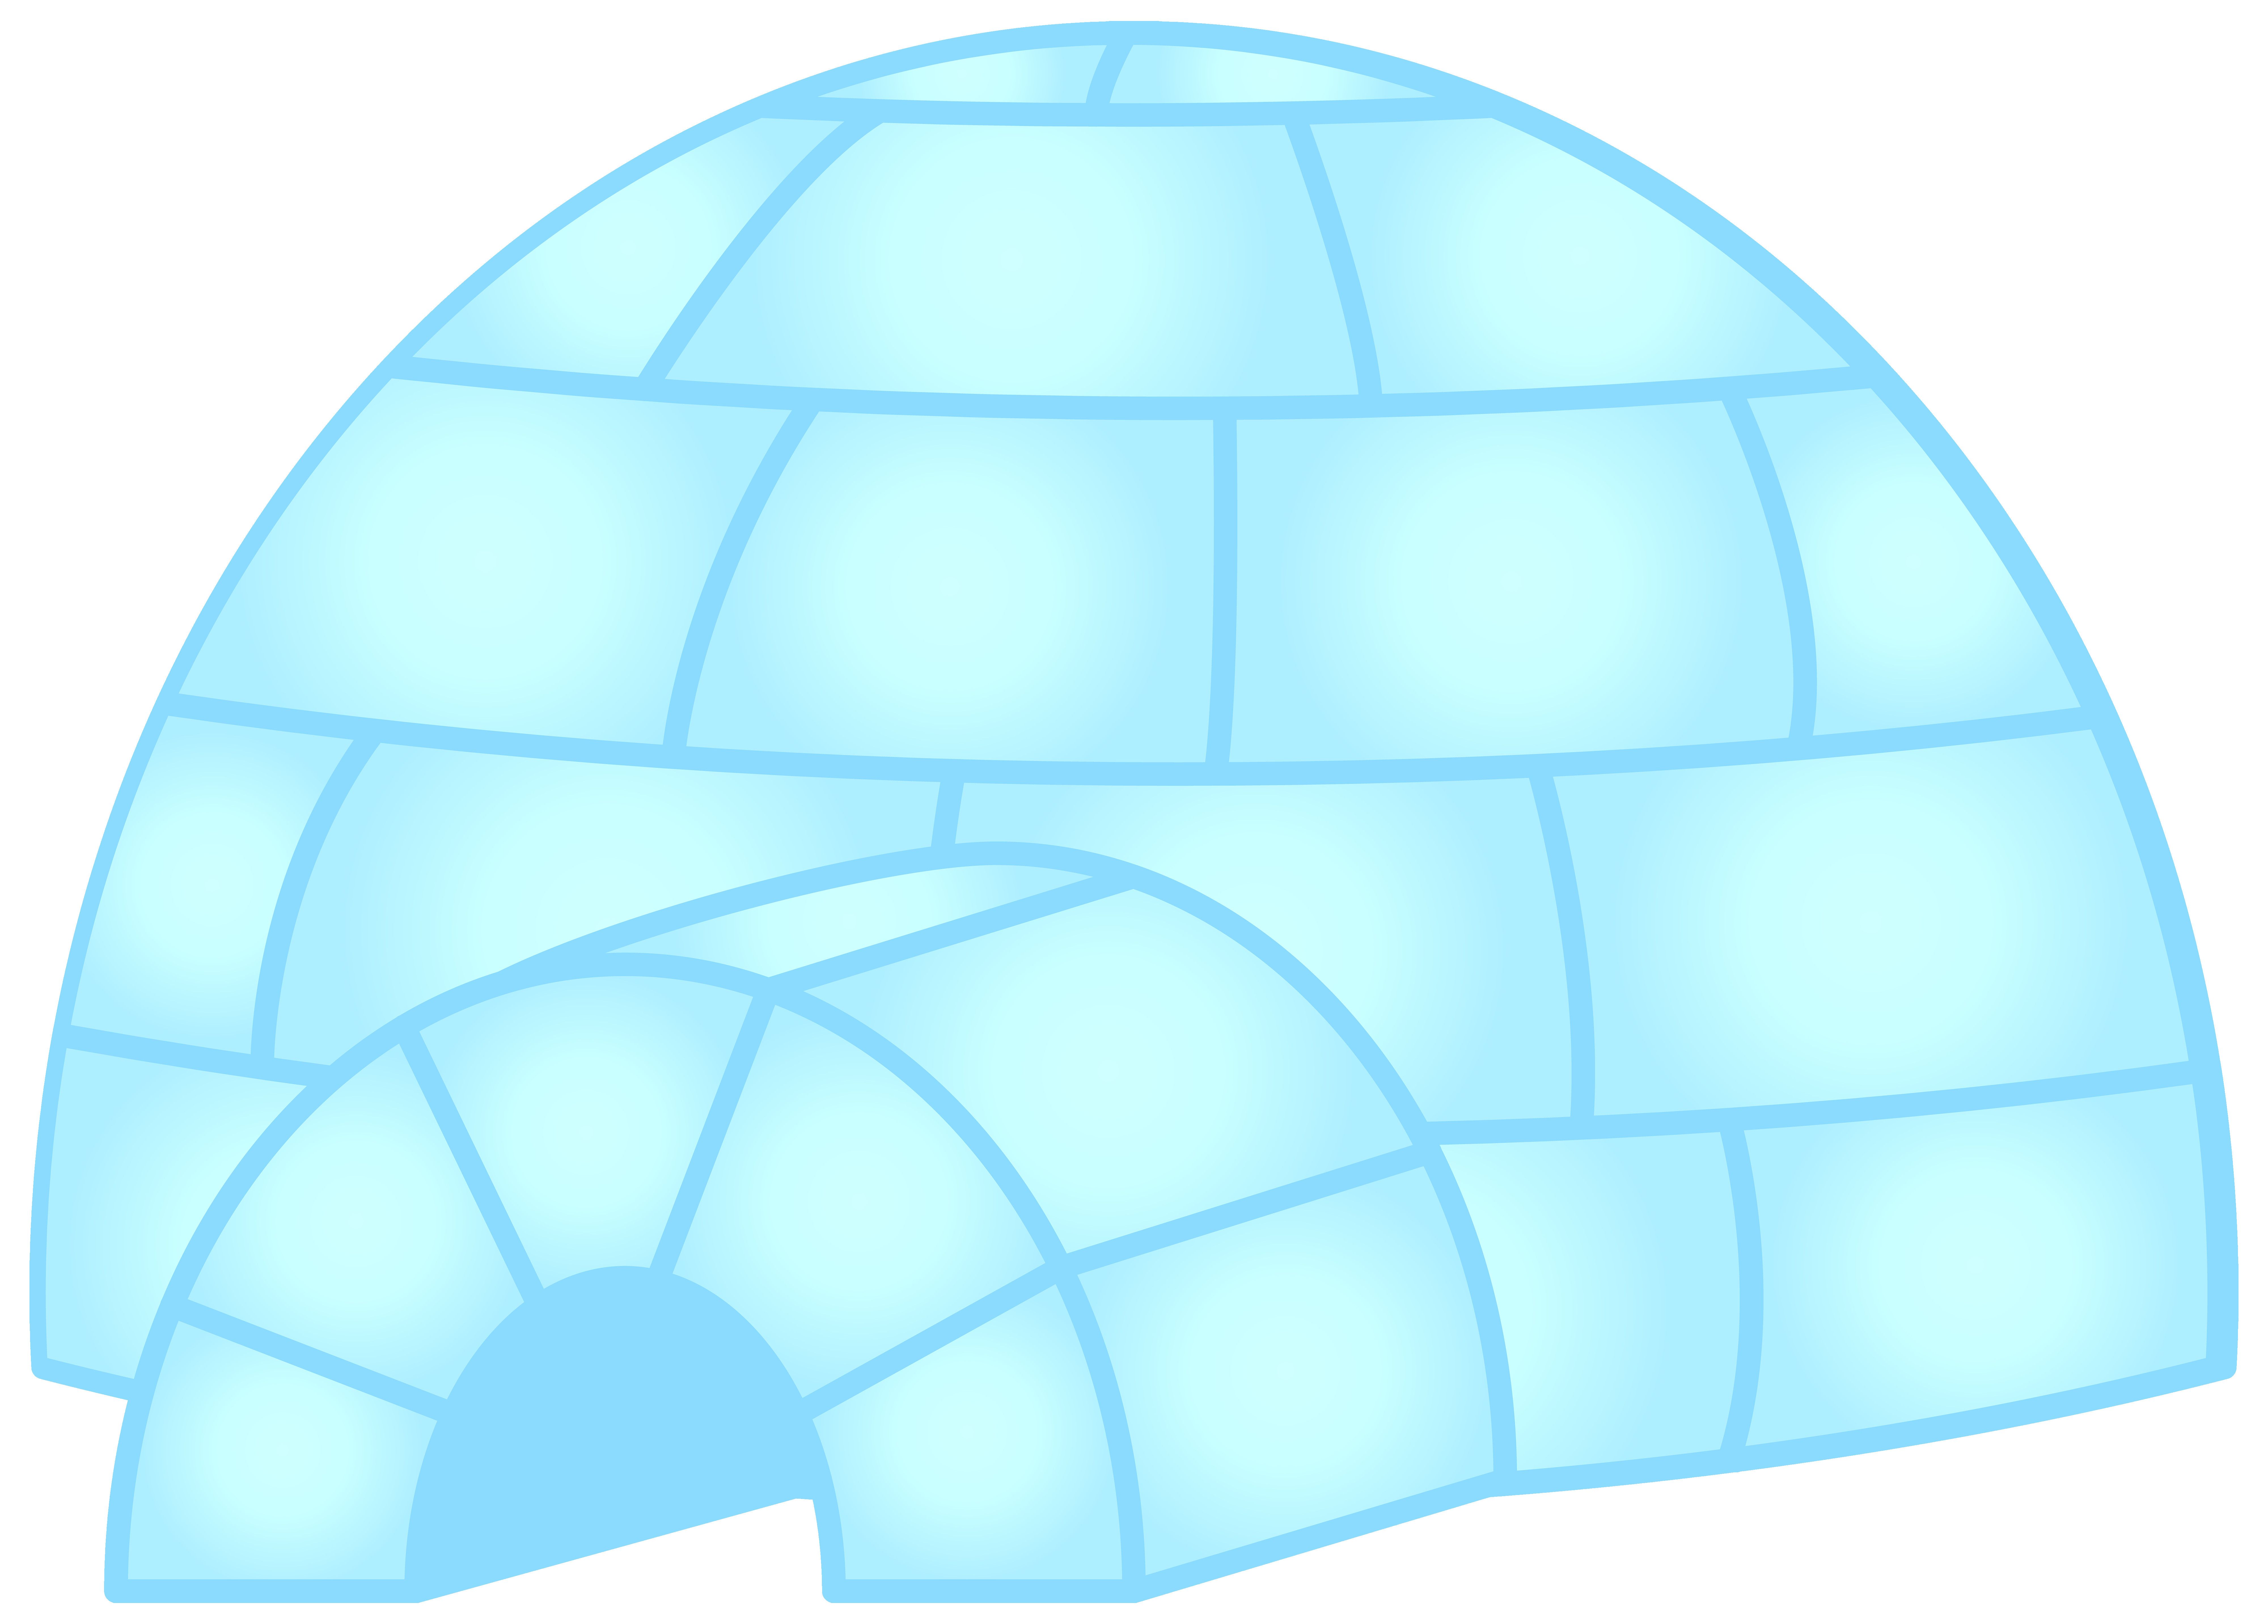 Igloo Coloring Page Free 306+ Crafter Files